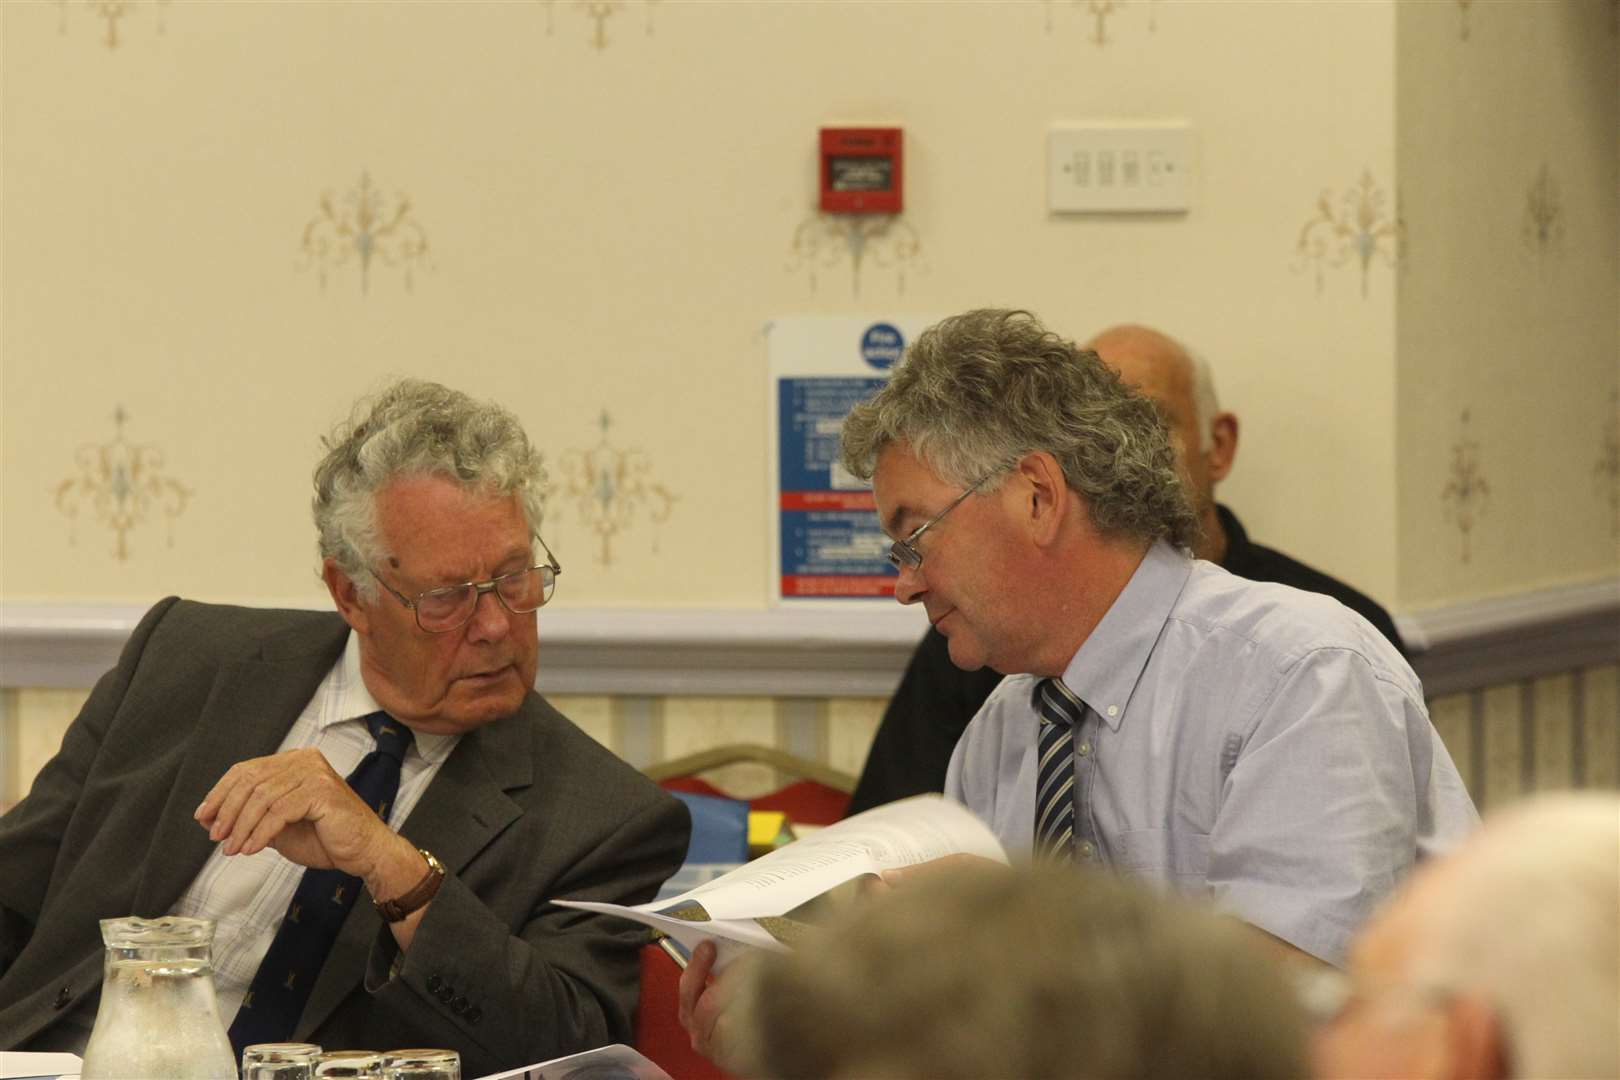 Sean Carter and David Southgate, part of the victorious NLRA team, at the inquiry last July